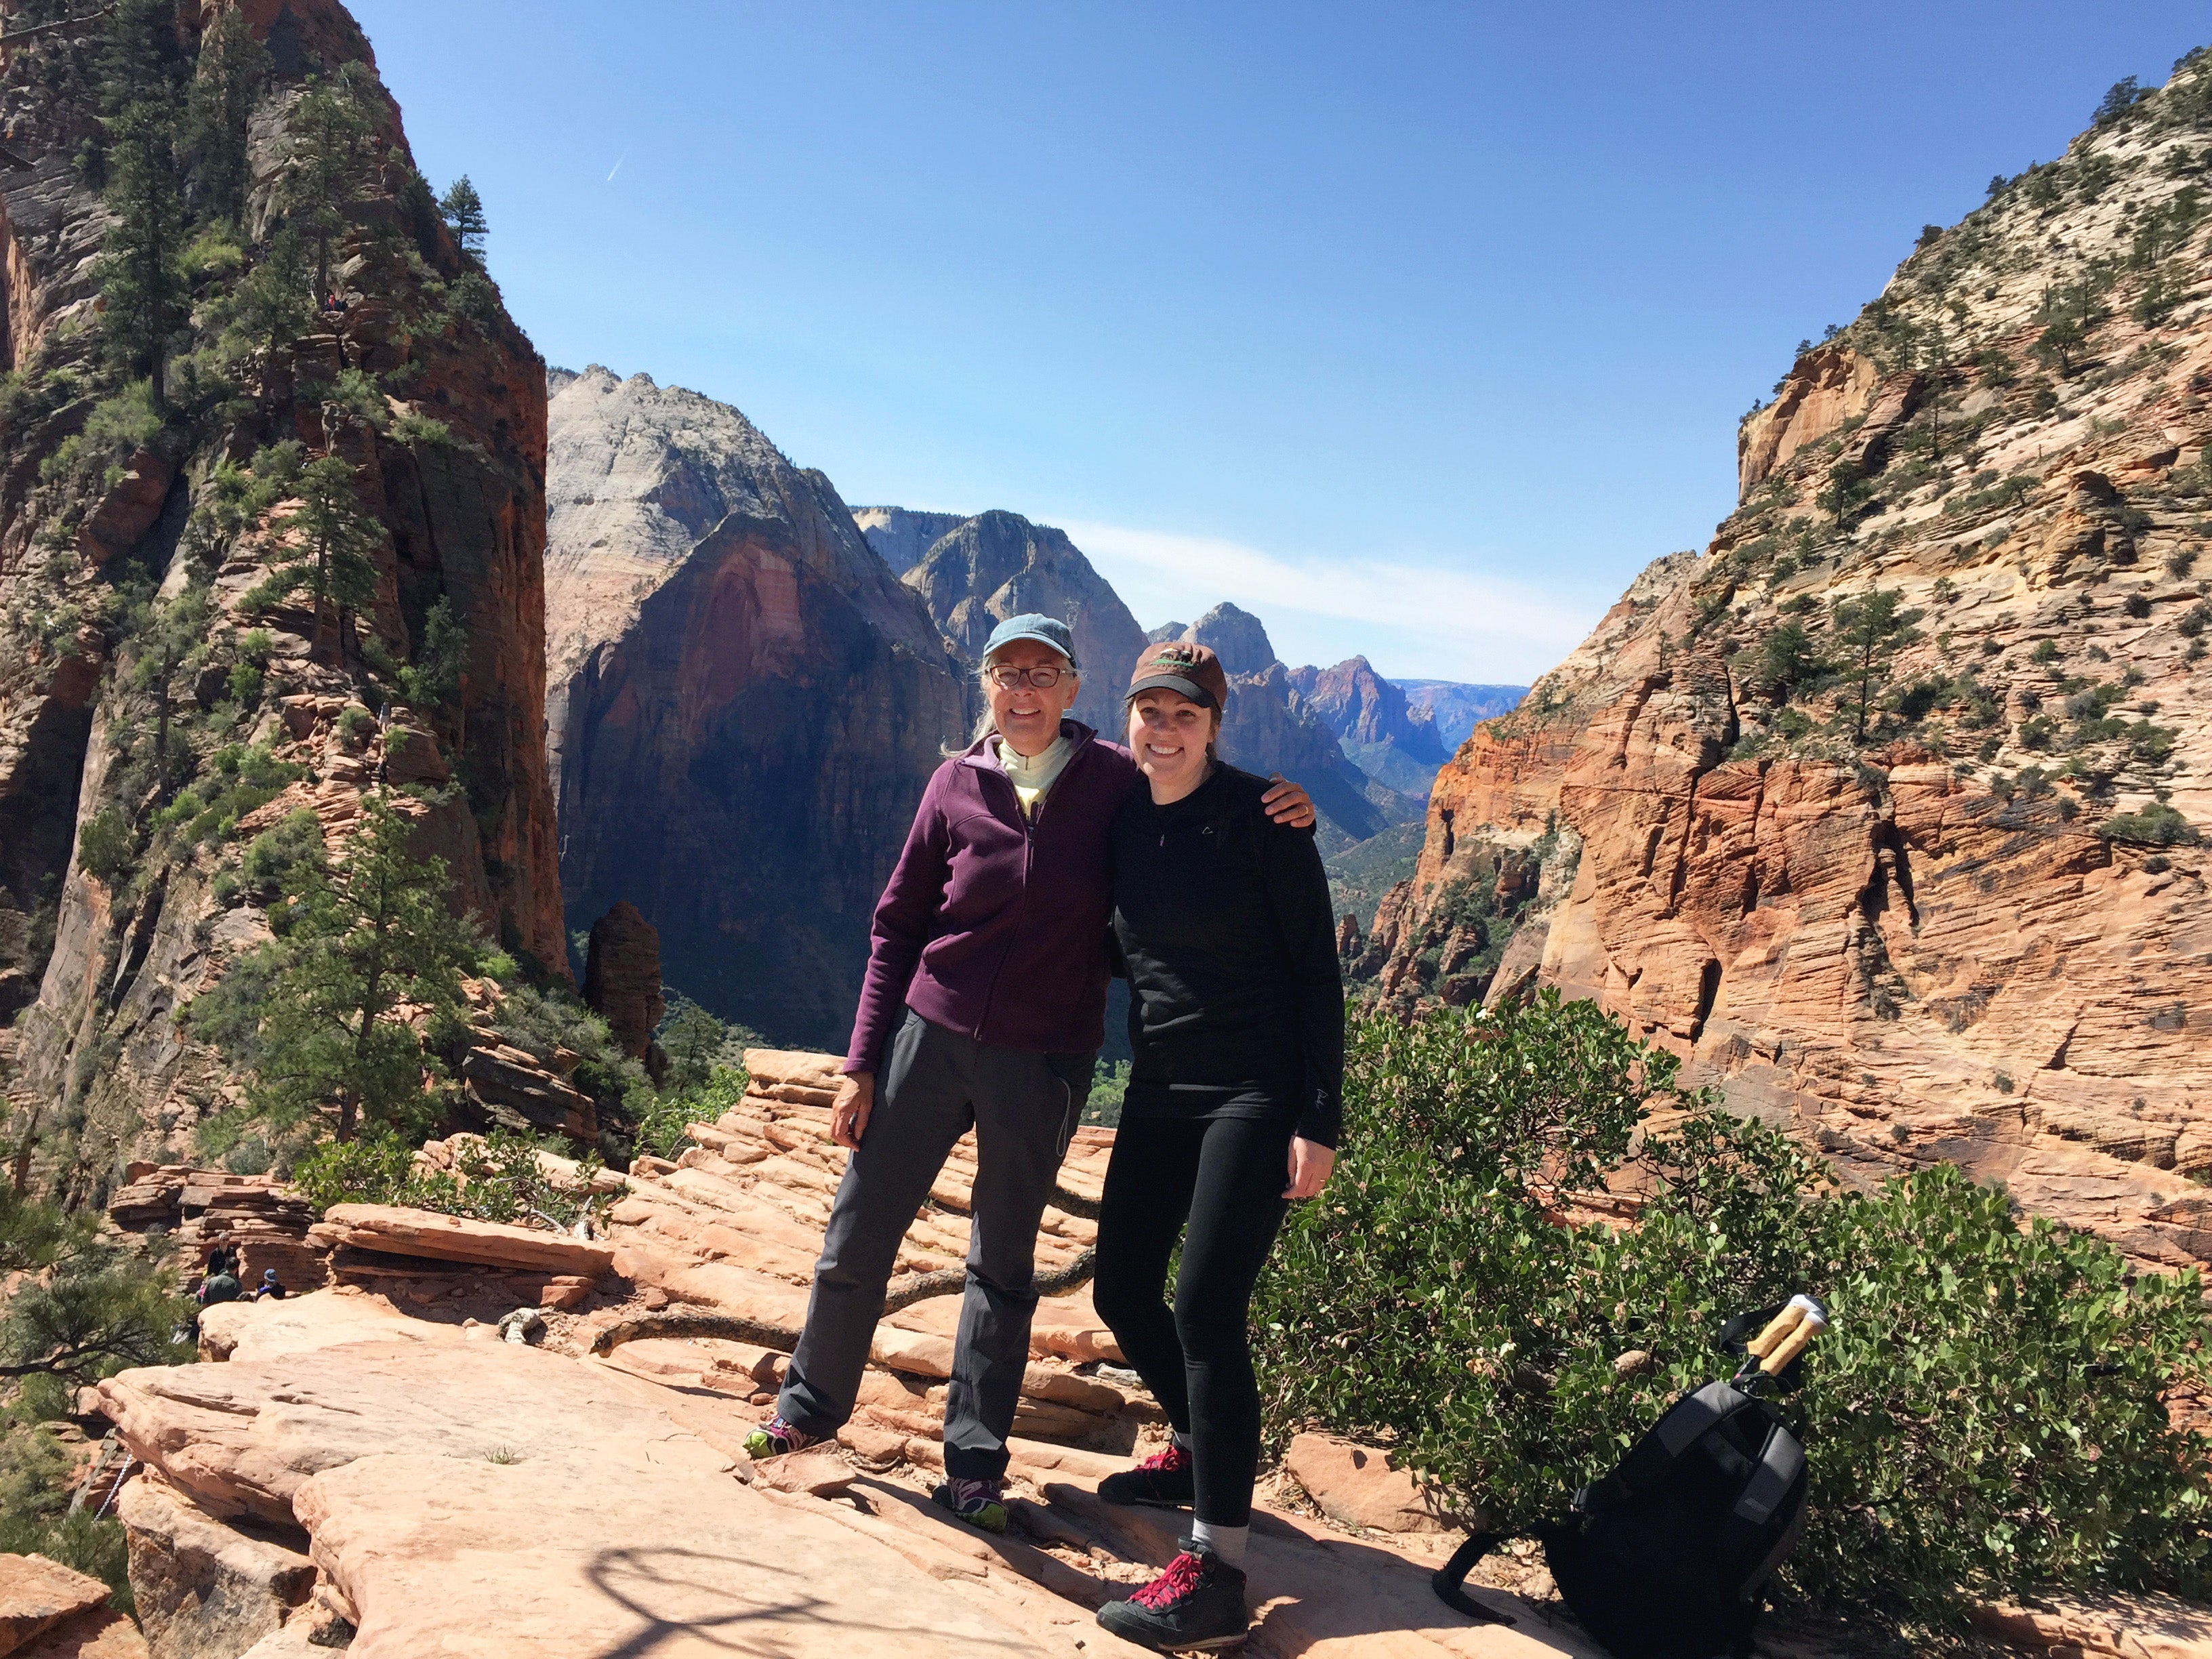 Erin and Susan in Zion National Park